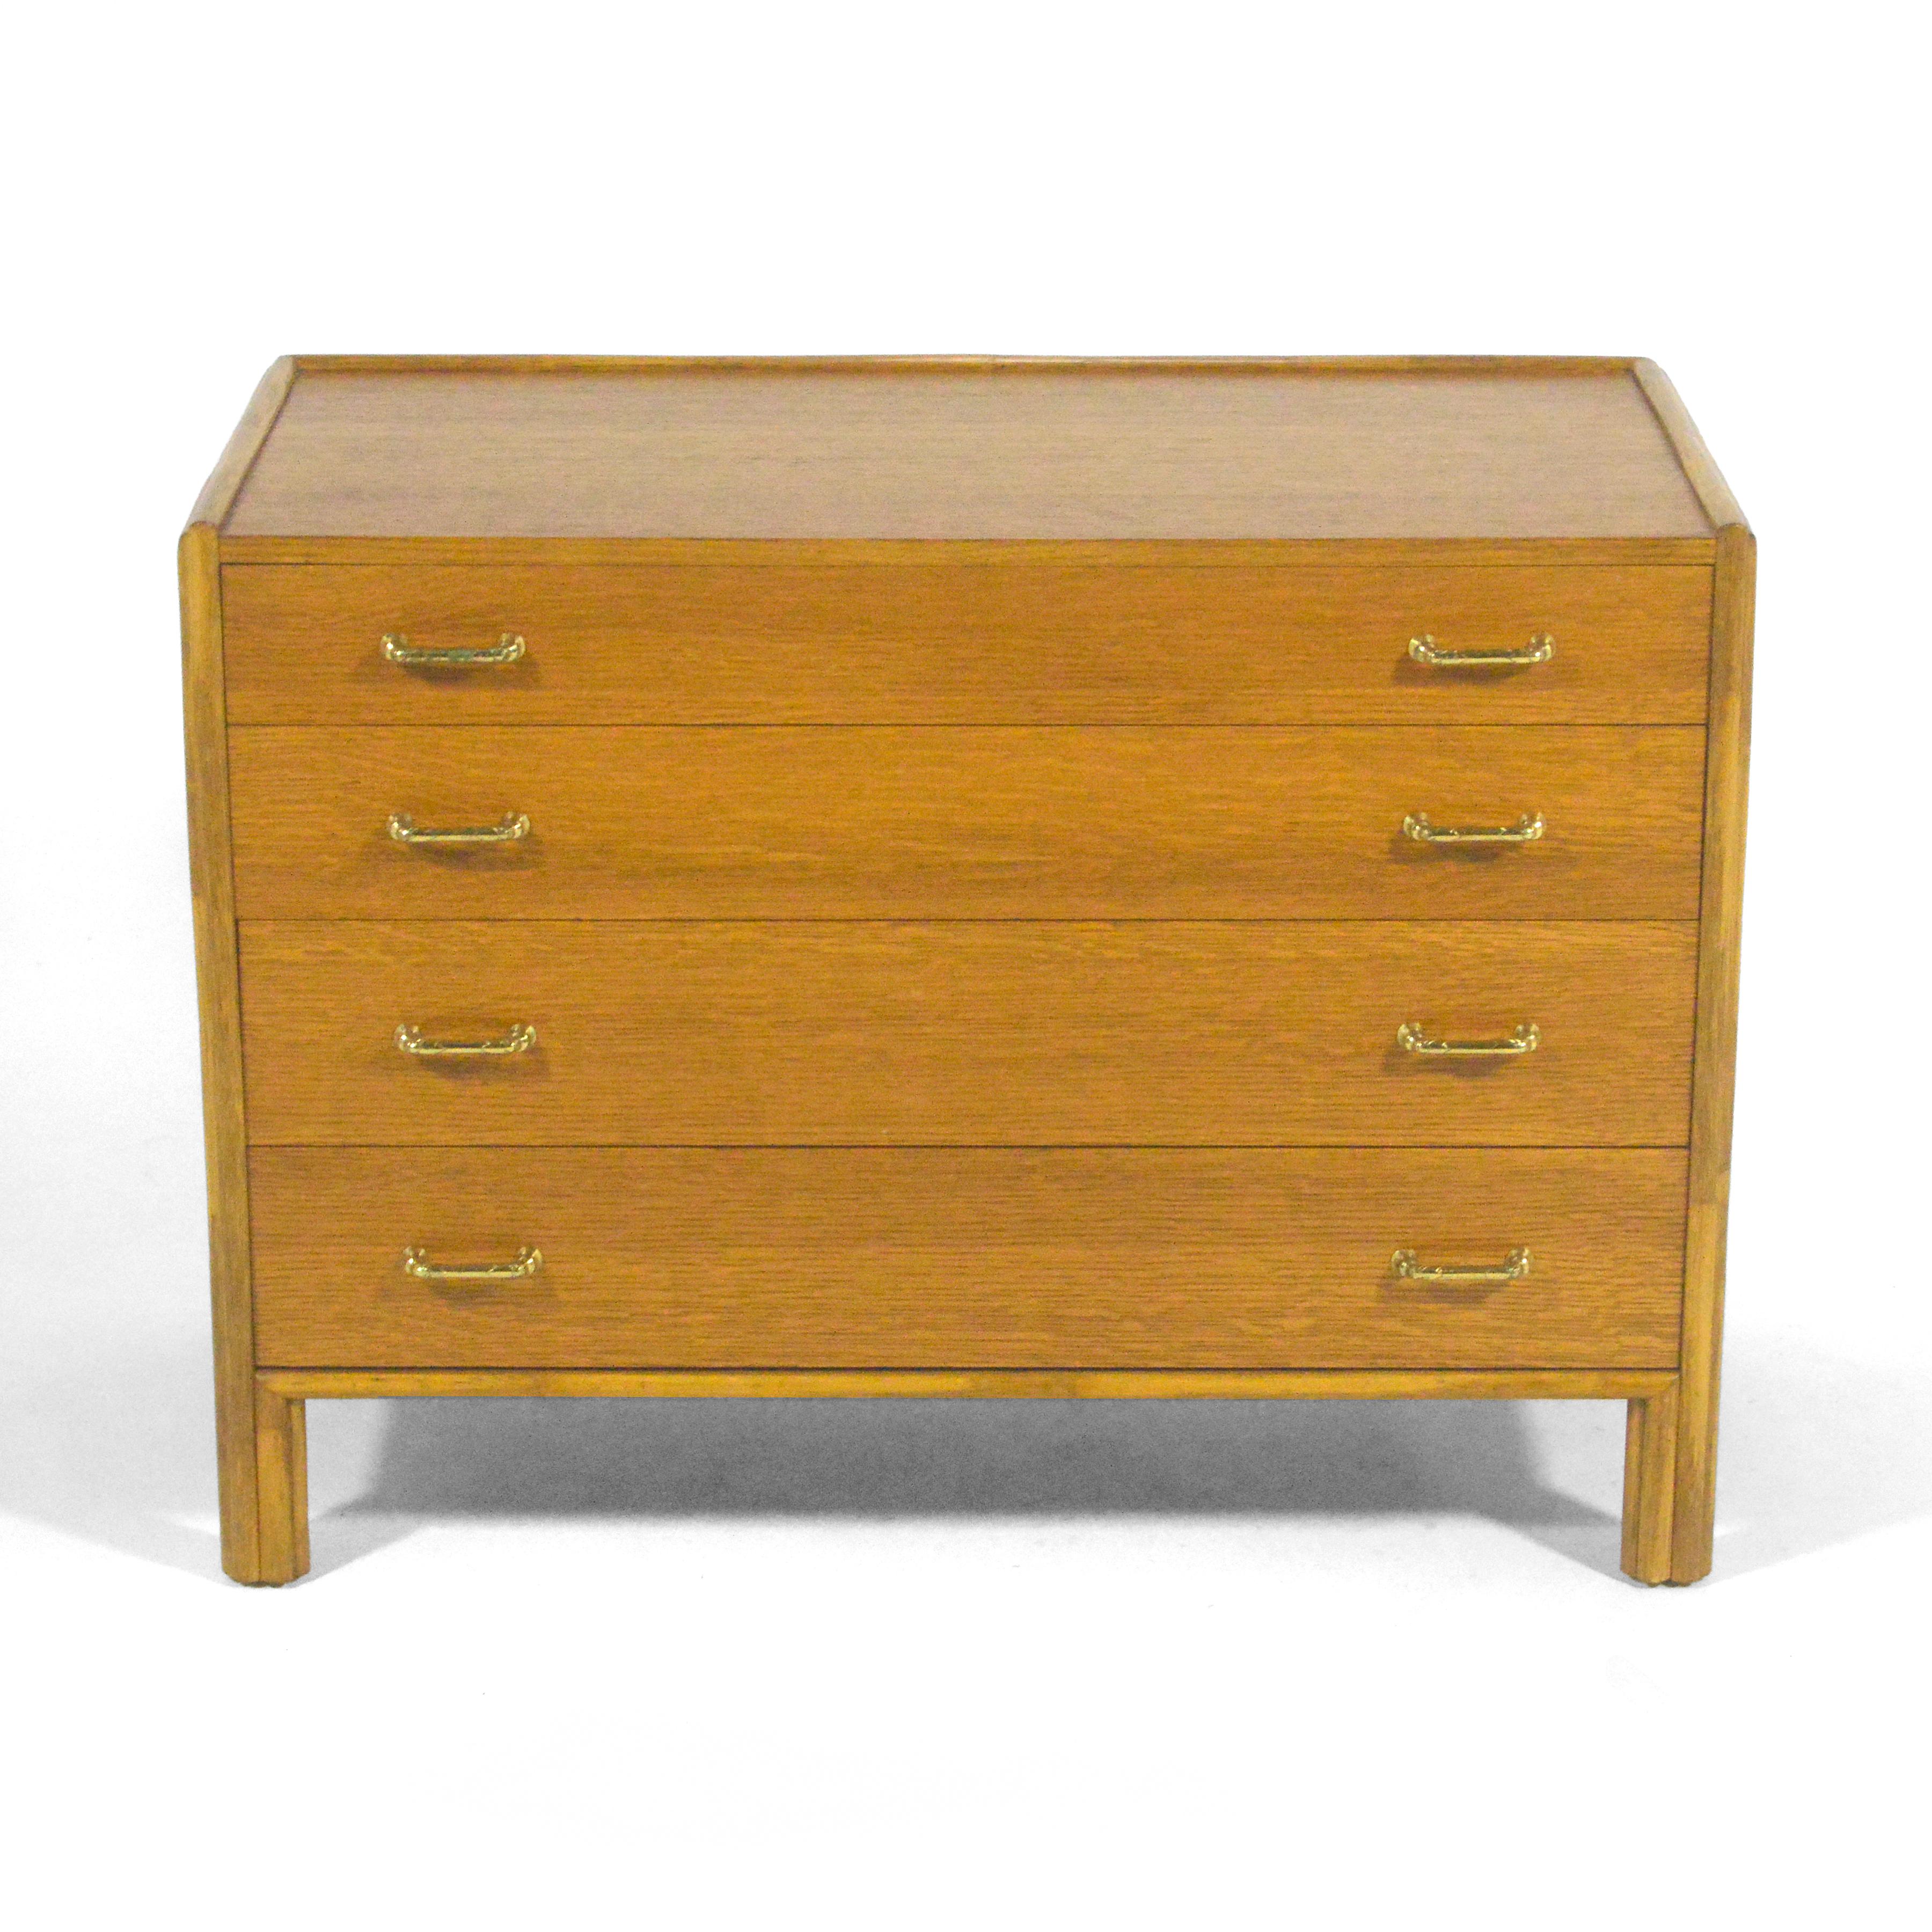 John McGuire Rattan and Oak Chest In Good Condition For Sale In Highland, IN